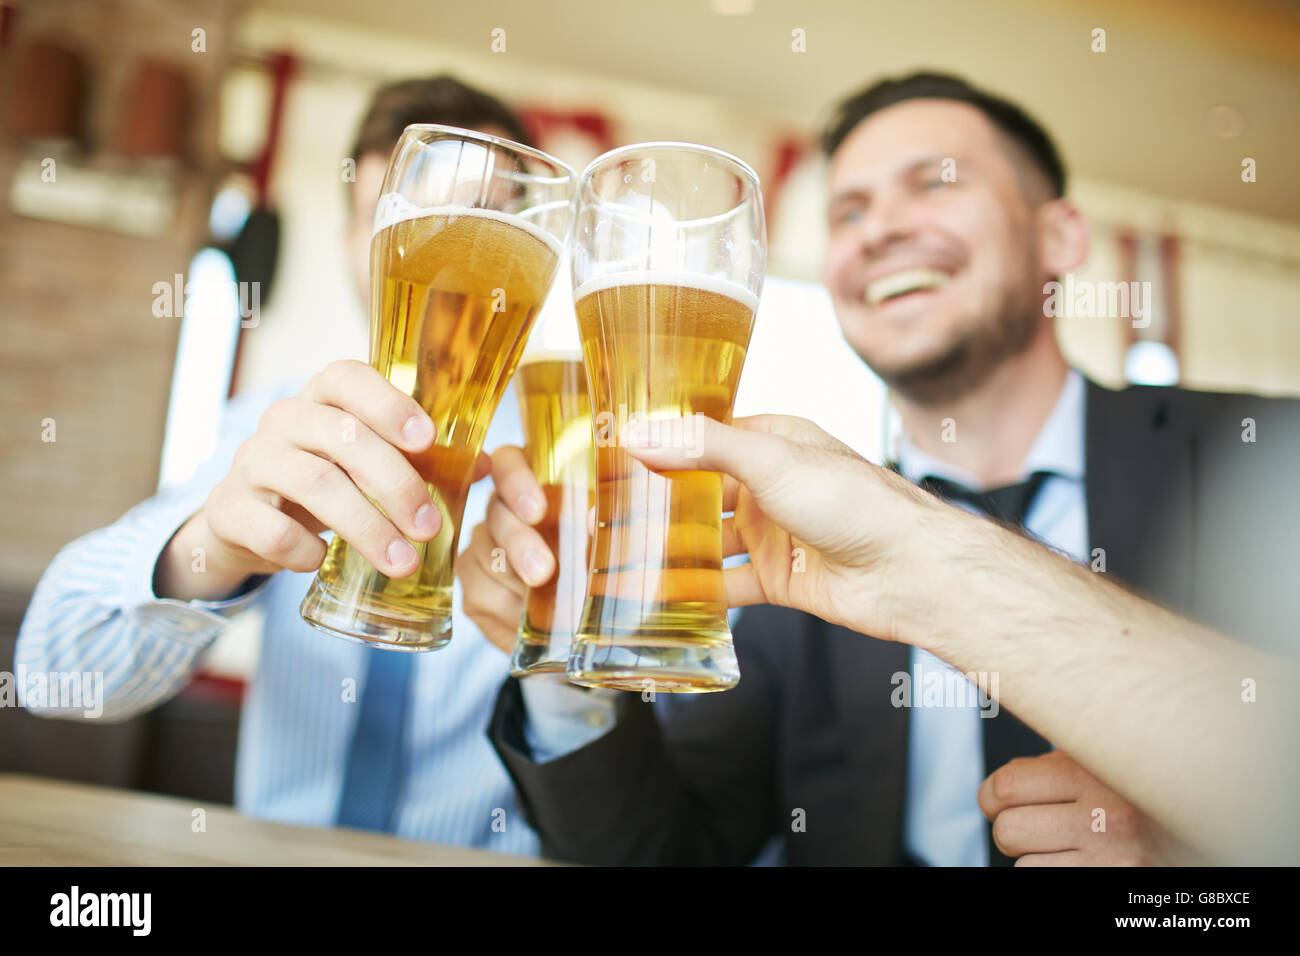 Clinking glasses of beer Stock Photo